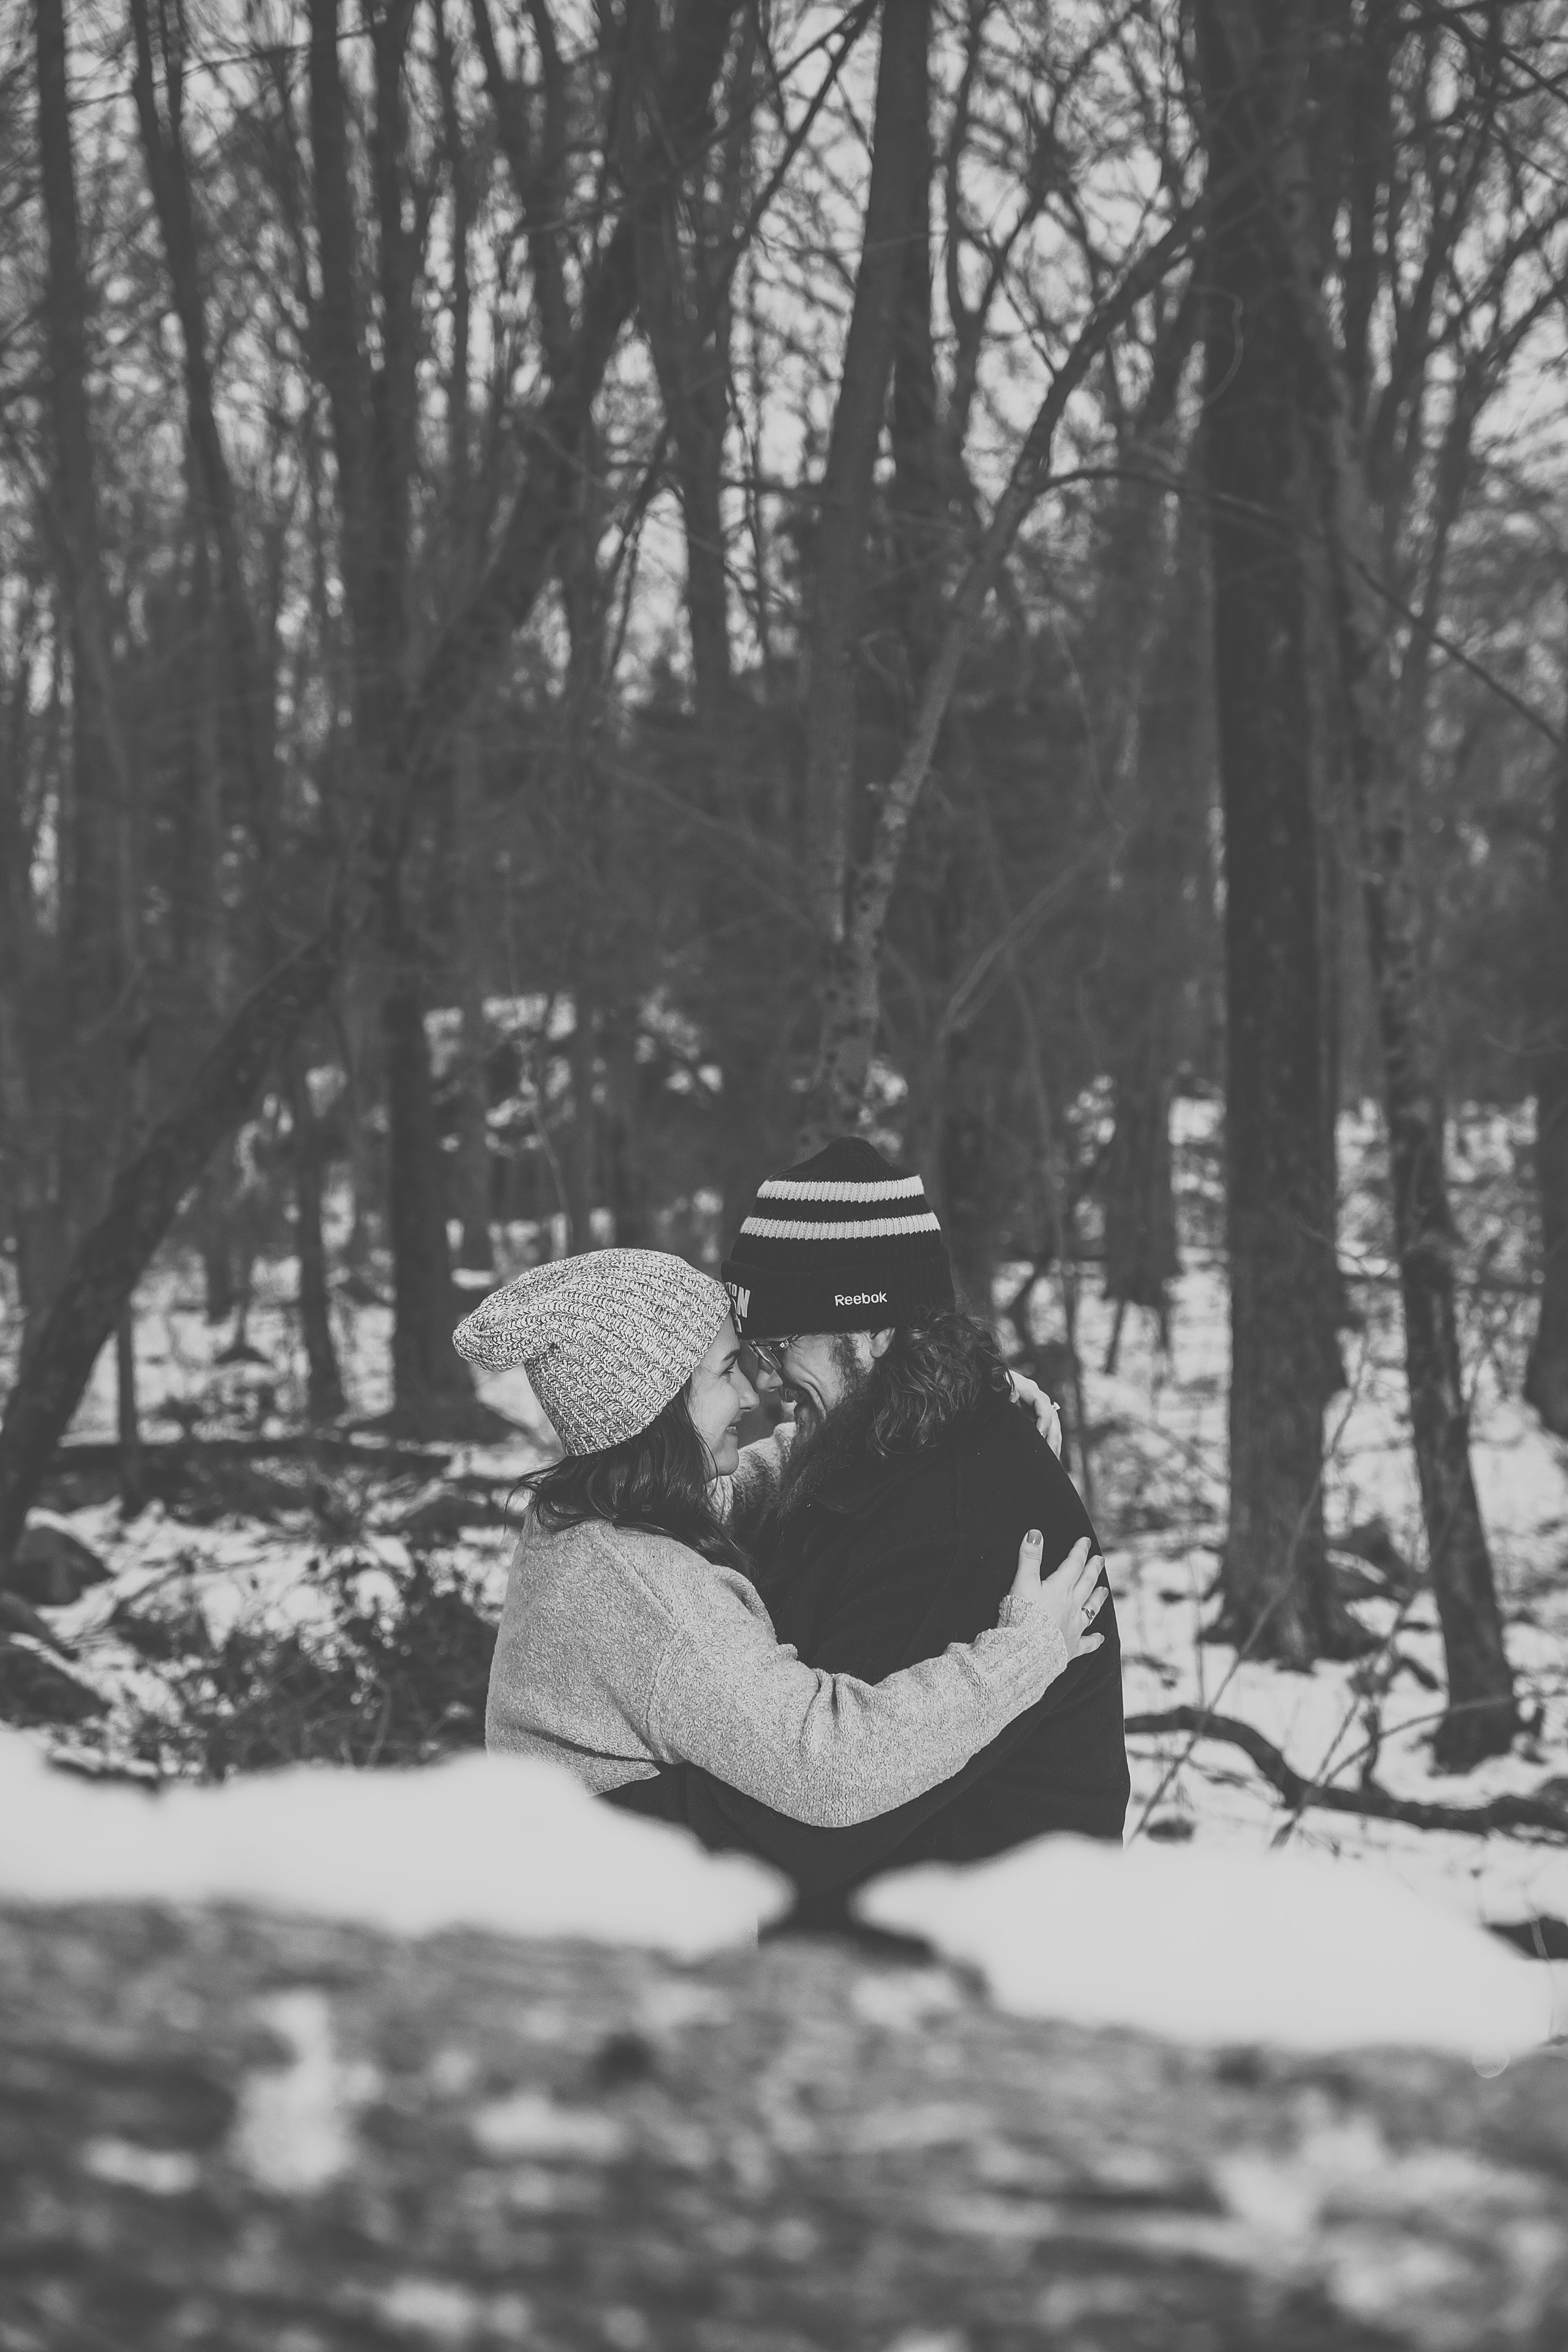 Rehoboth Wedding Photographer,Plymouth Wedding Photographer,Engagement Session in the Snow,Woodsy Engagement Pictures,Engagement Session in the Woods